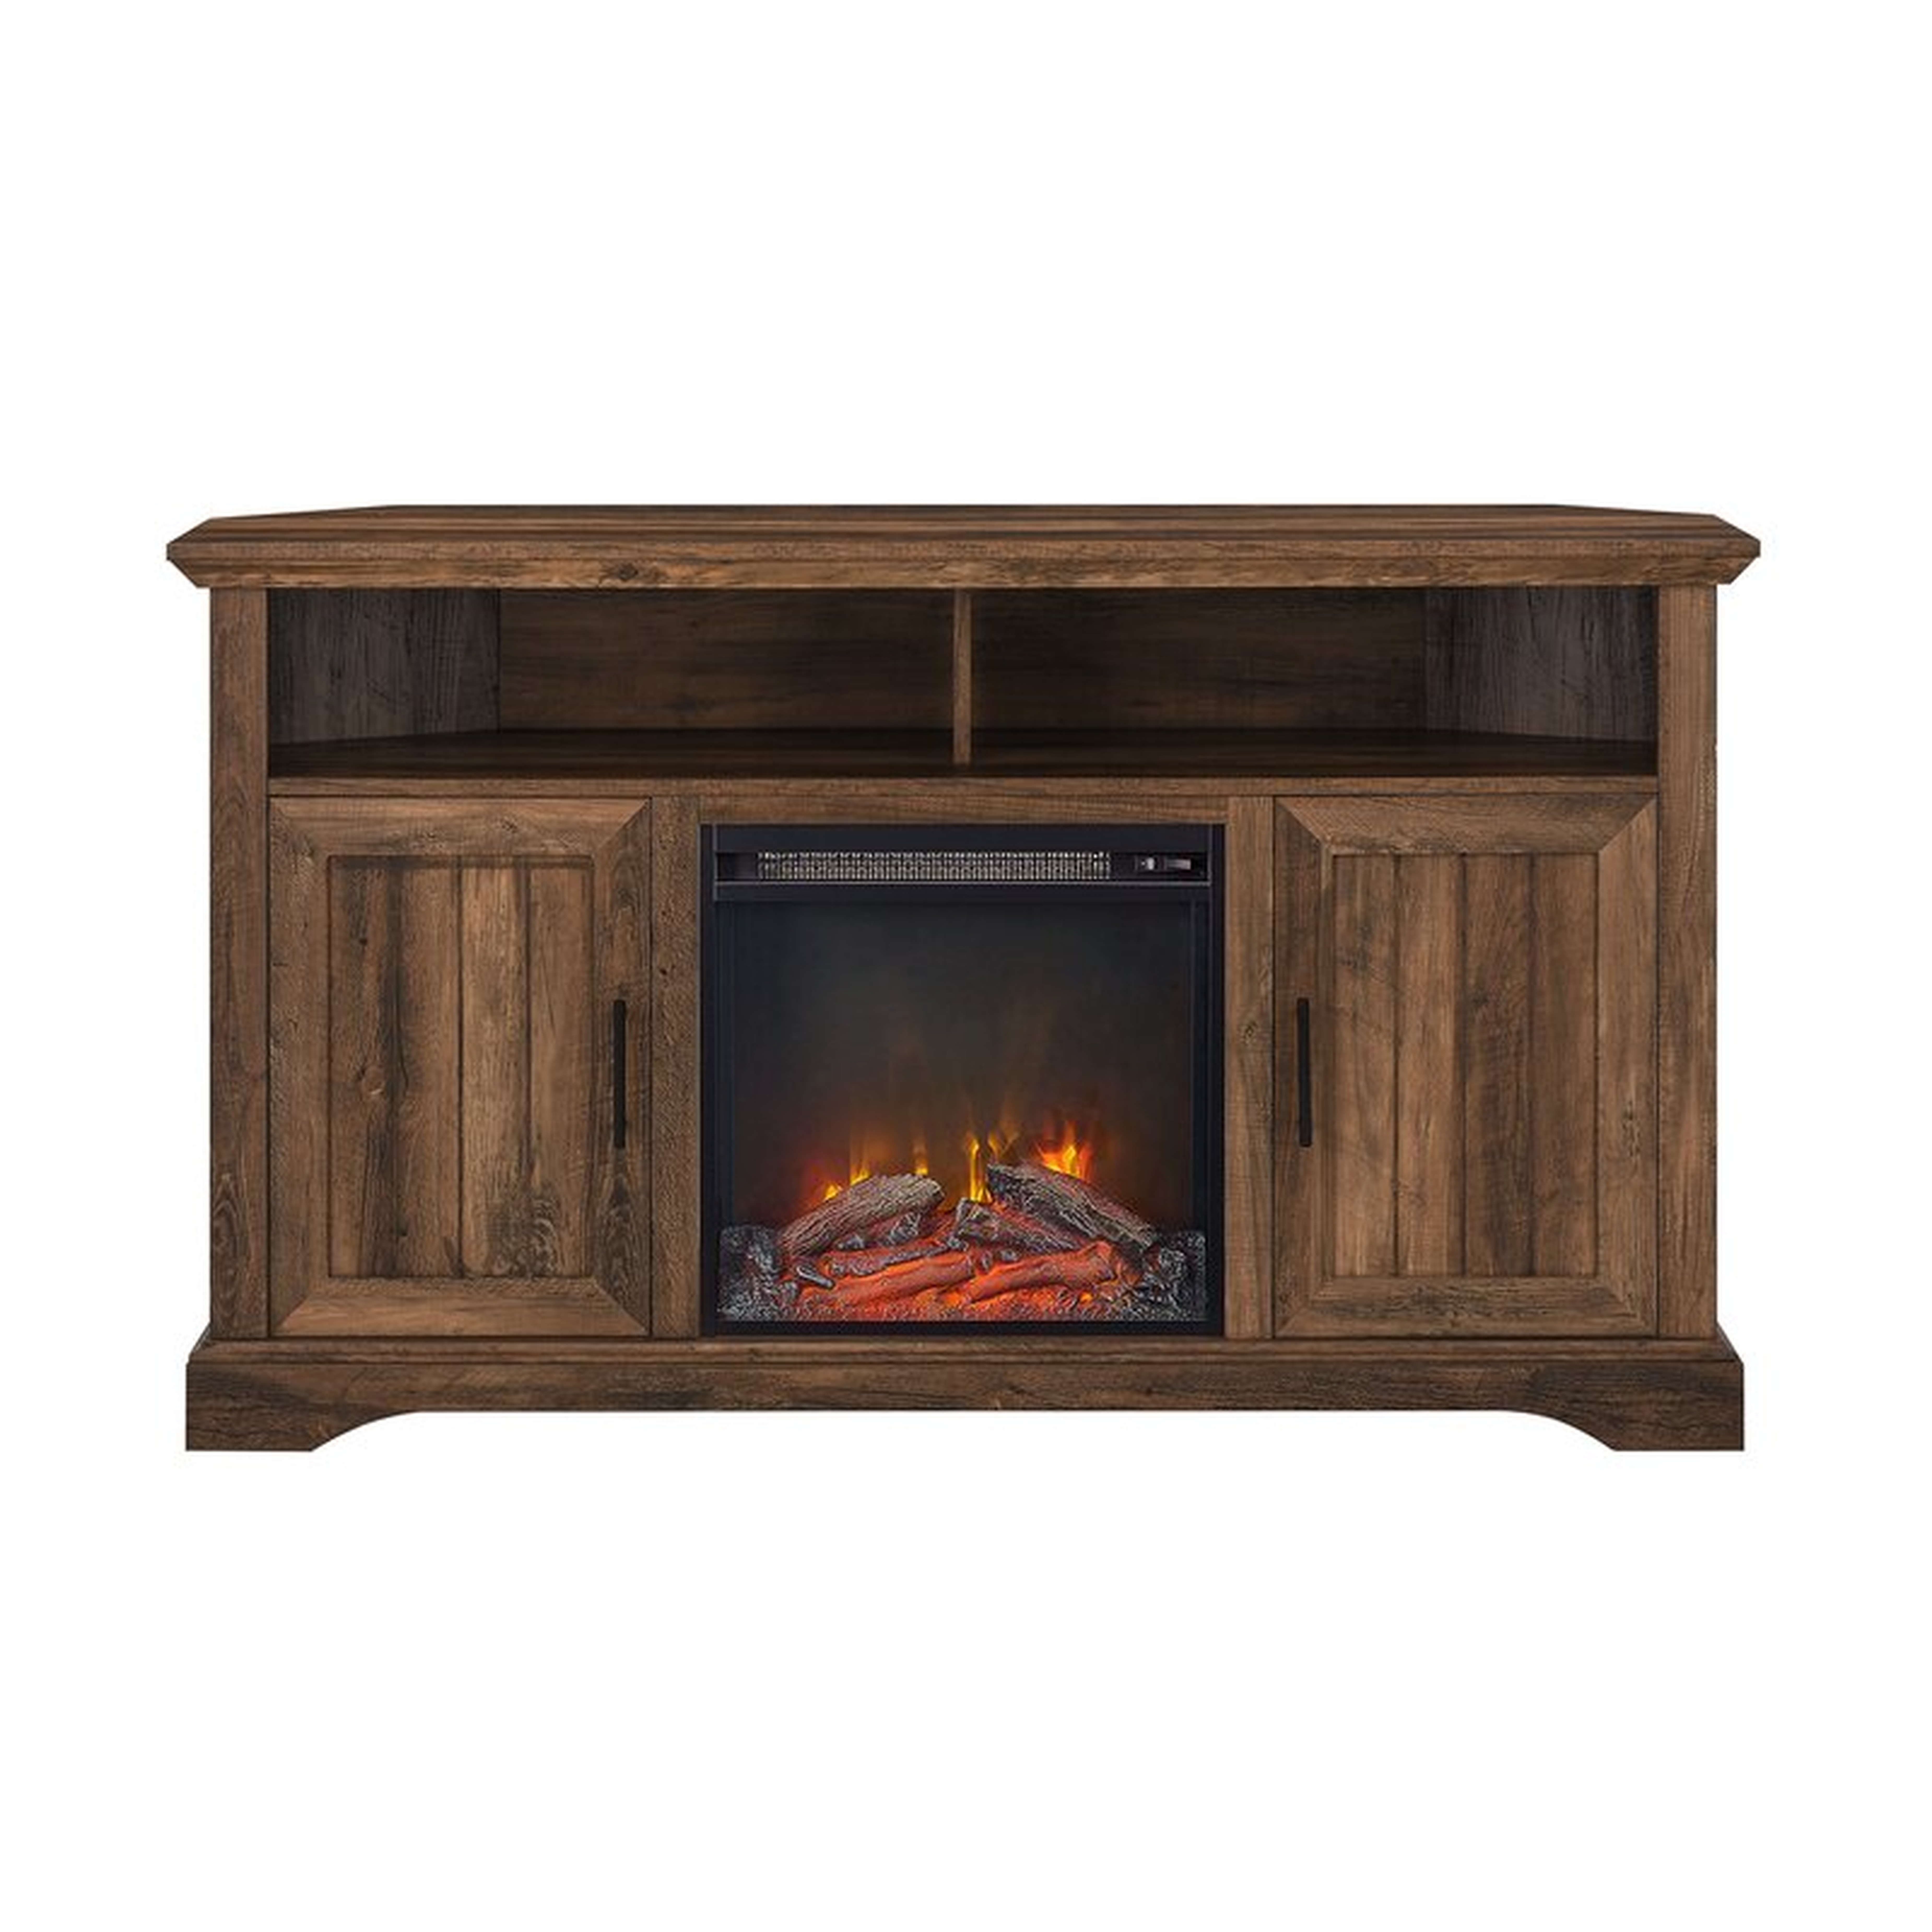 Ramah TV Stand for TVs up to 60" with Fireplace Included - Wayfair